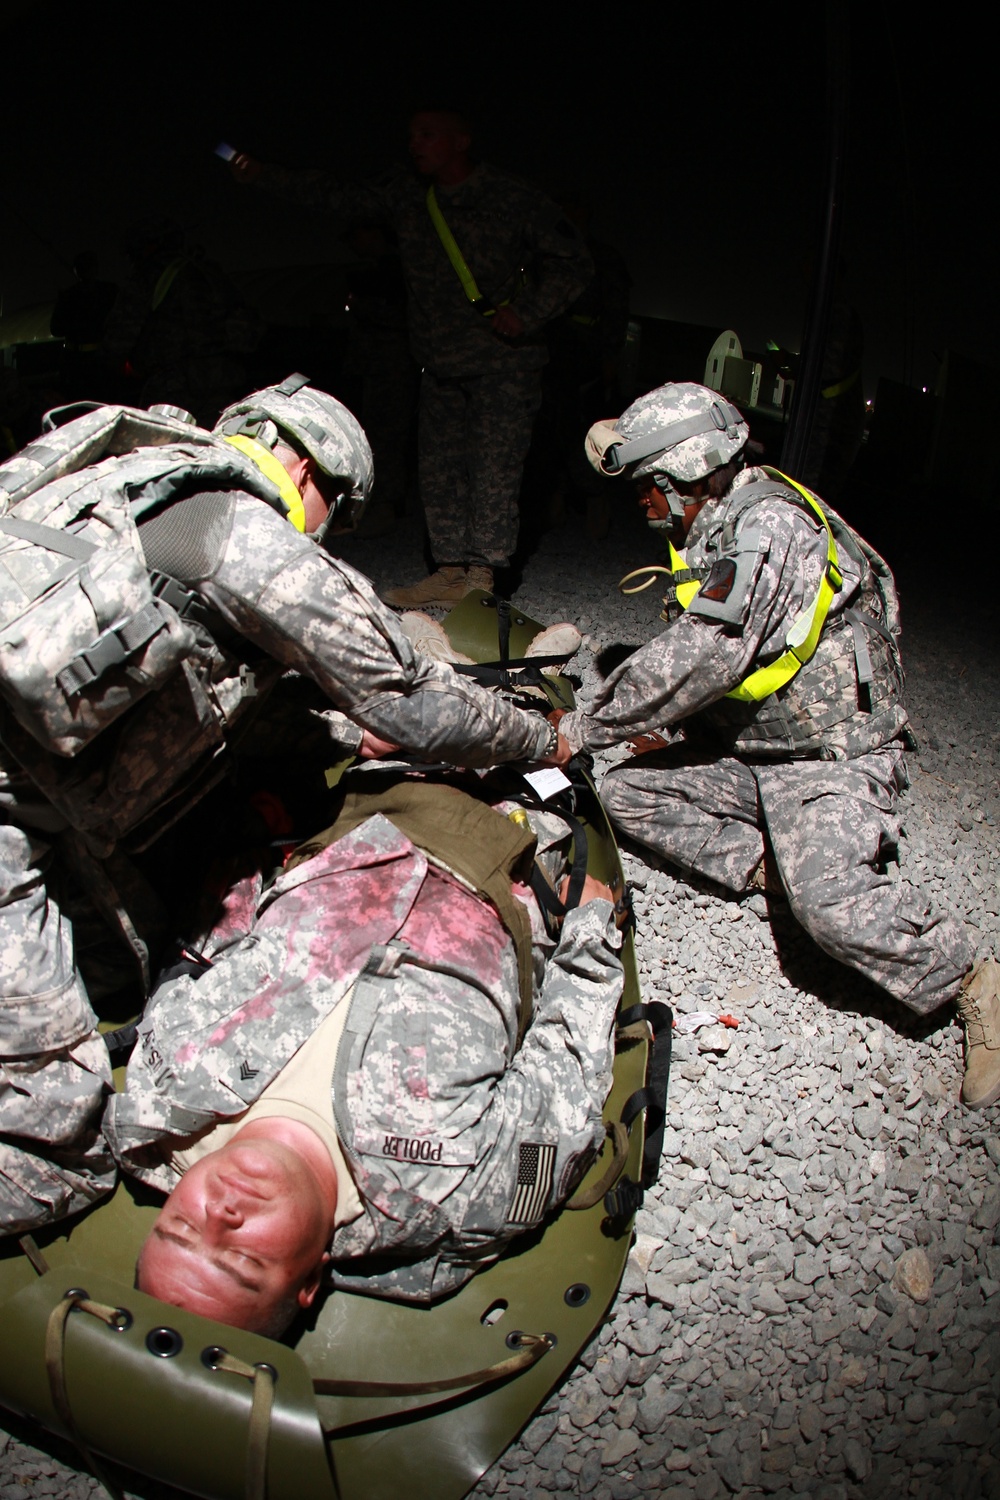 1st Sustainment Brigade Soldiers provides medical aid during the Combat Lifesavers Course